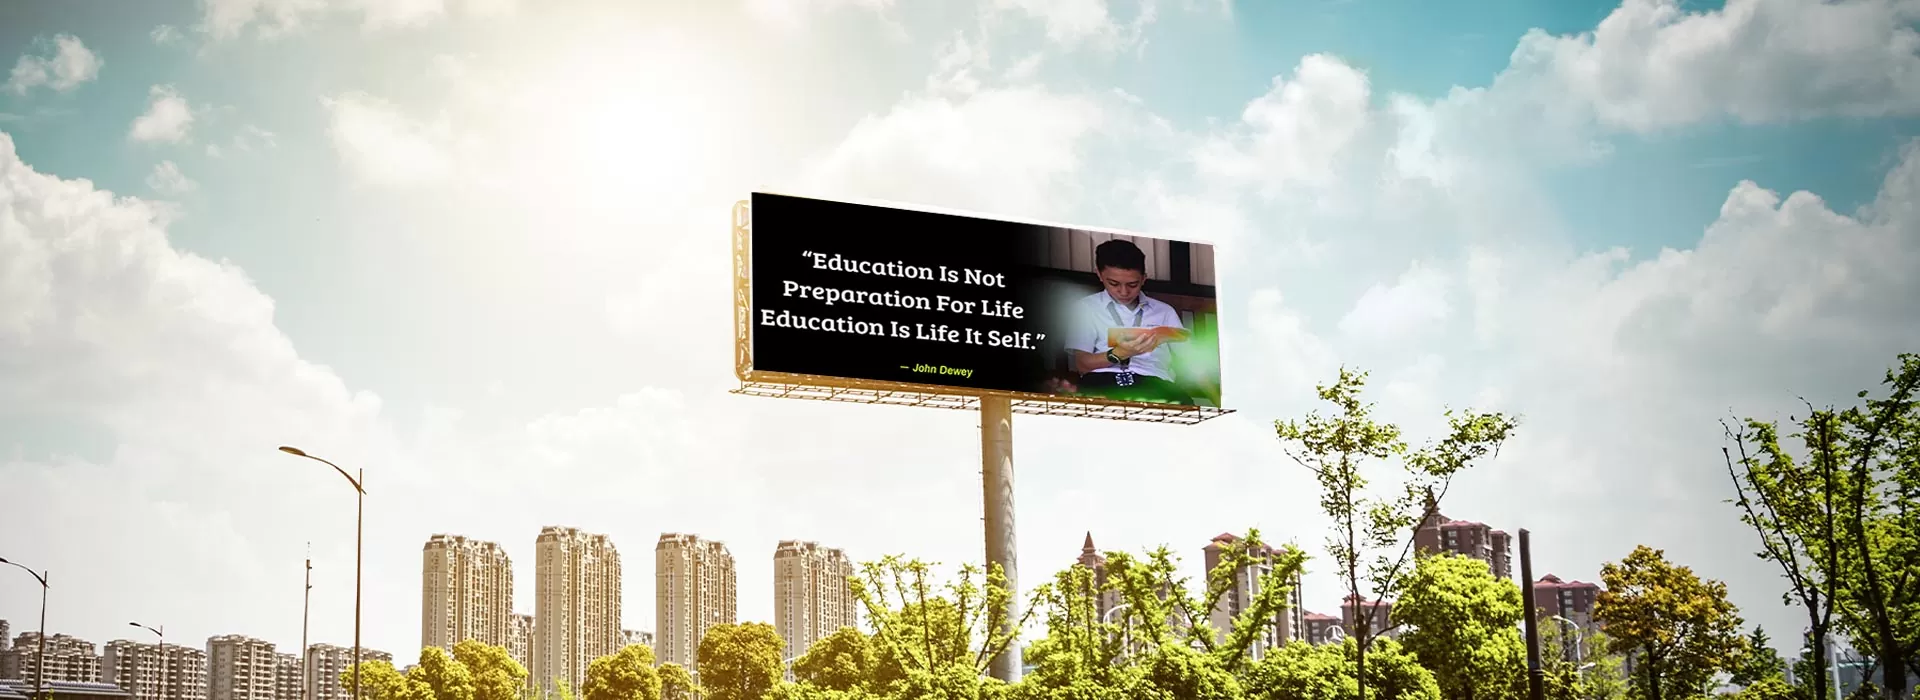 LED display for education